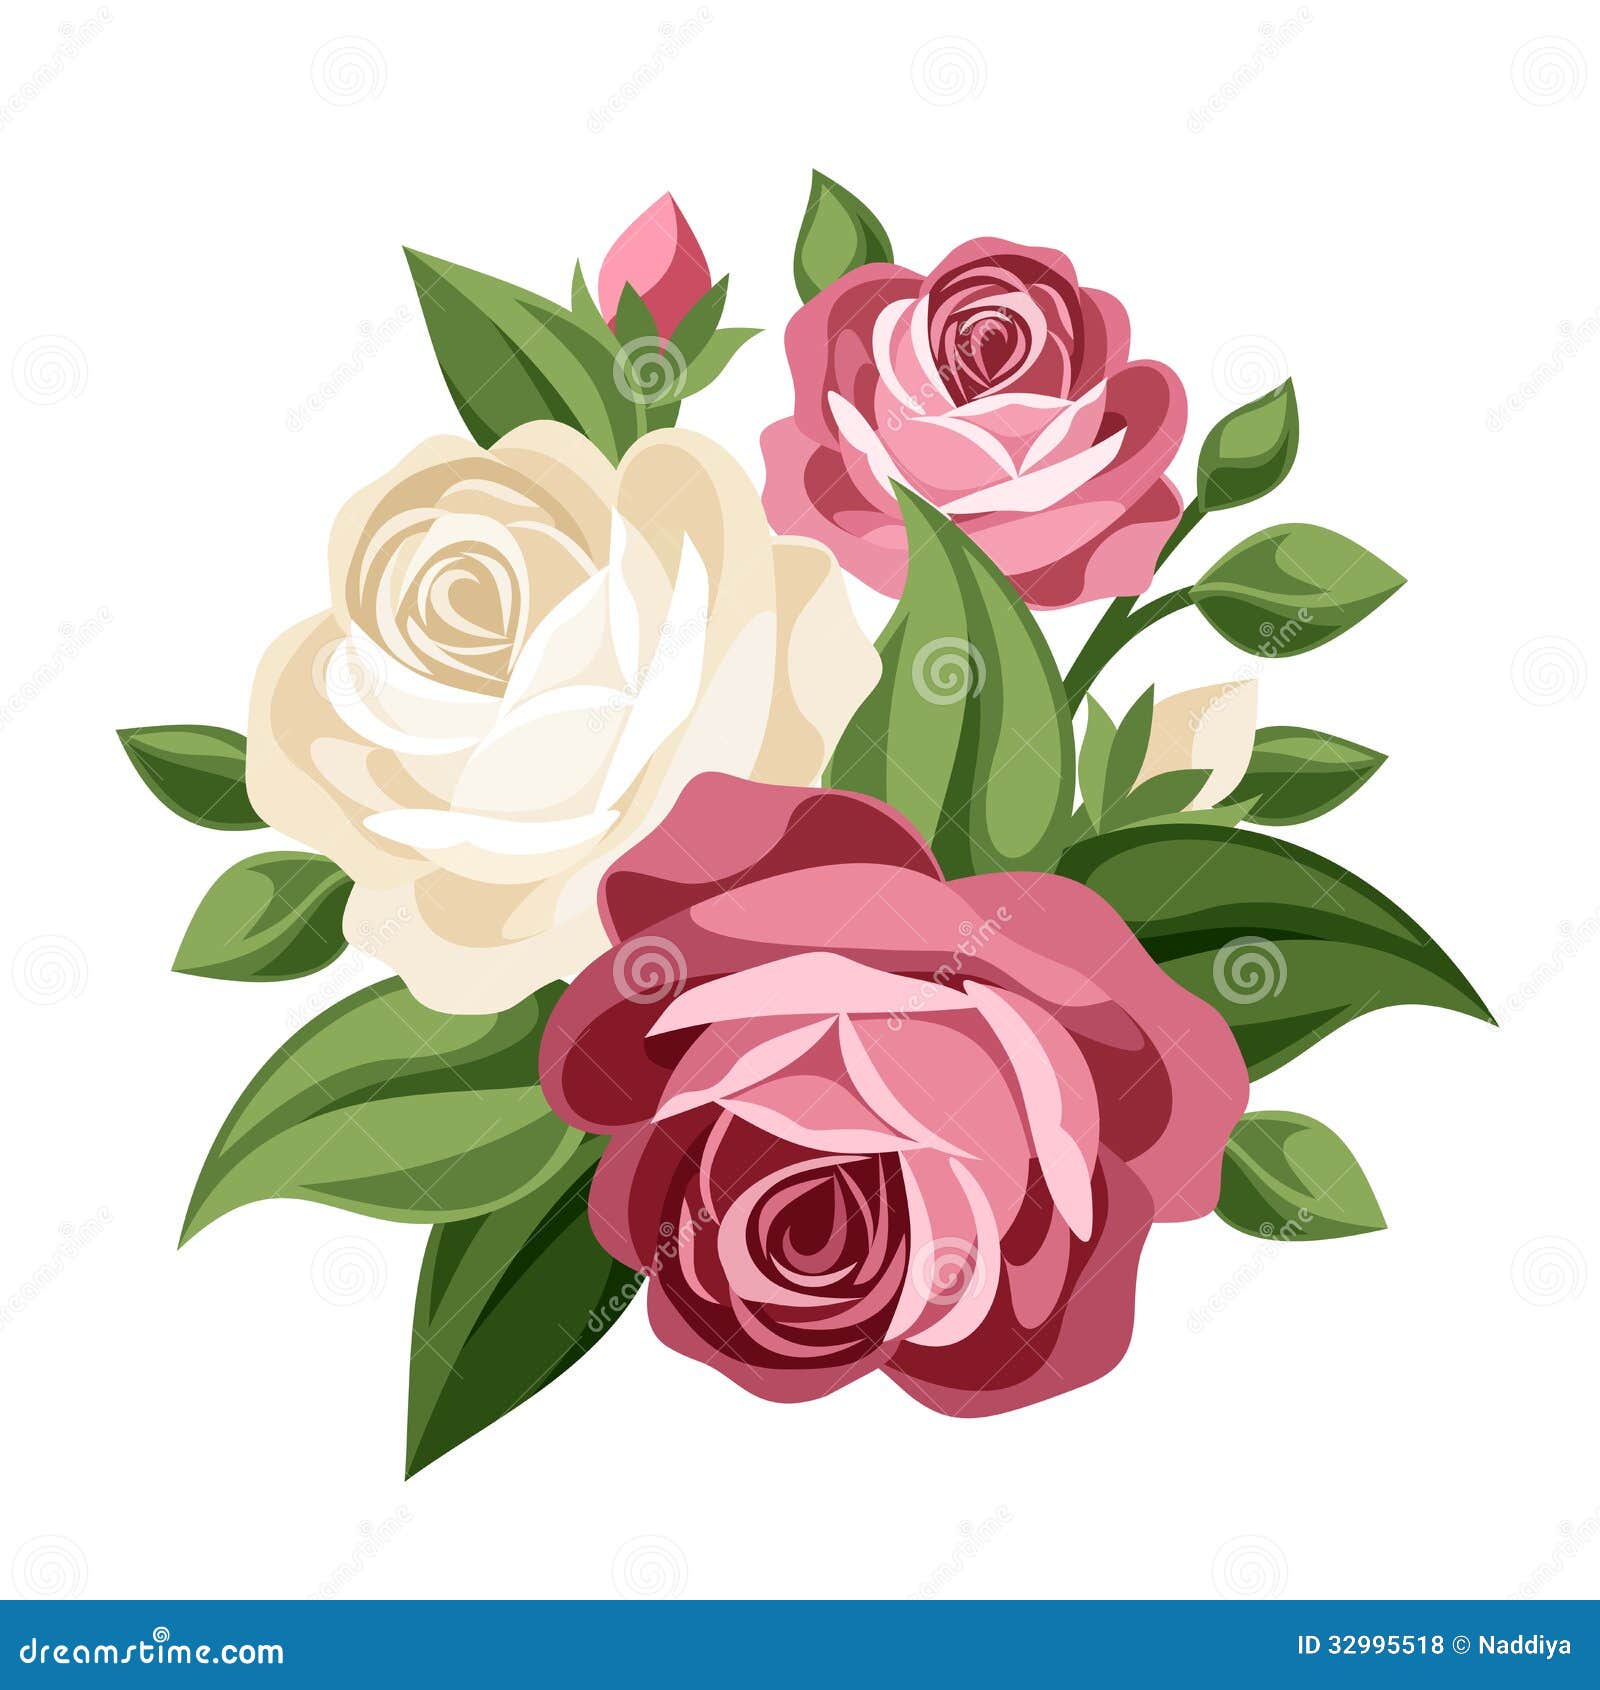 pink and white vintage roses.